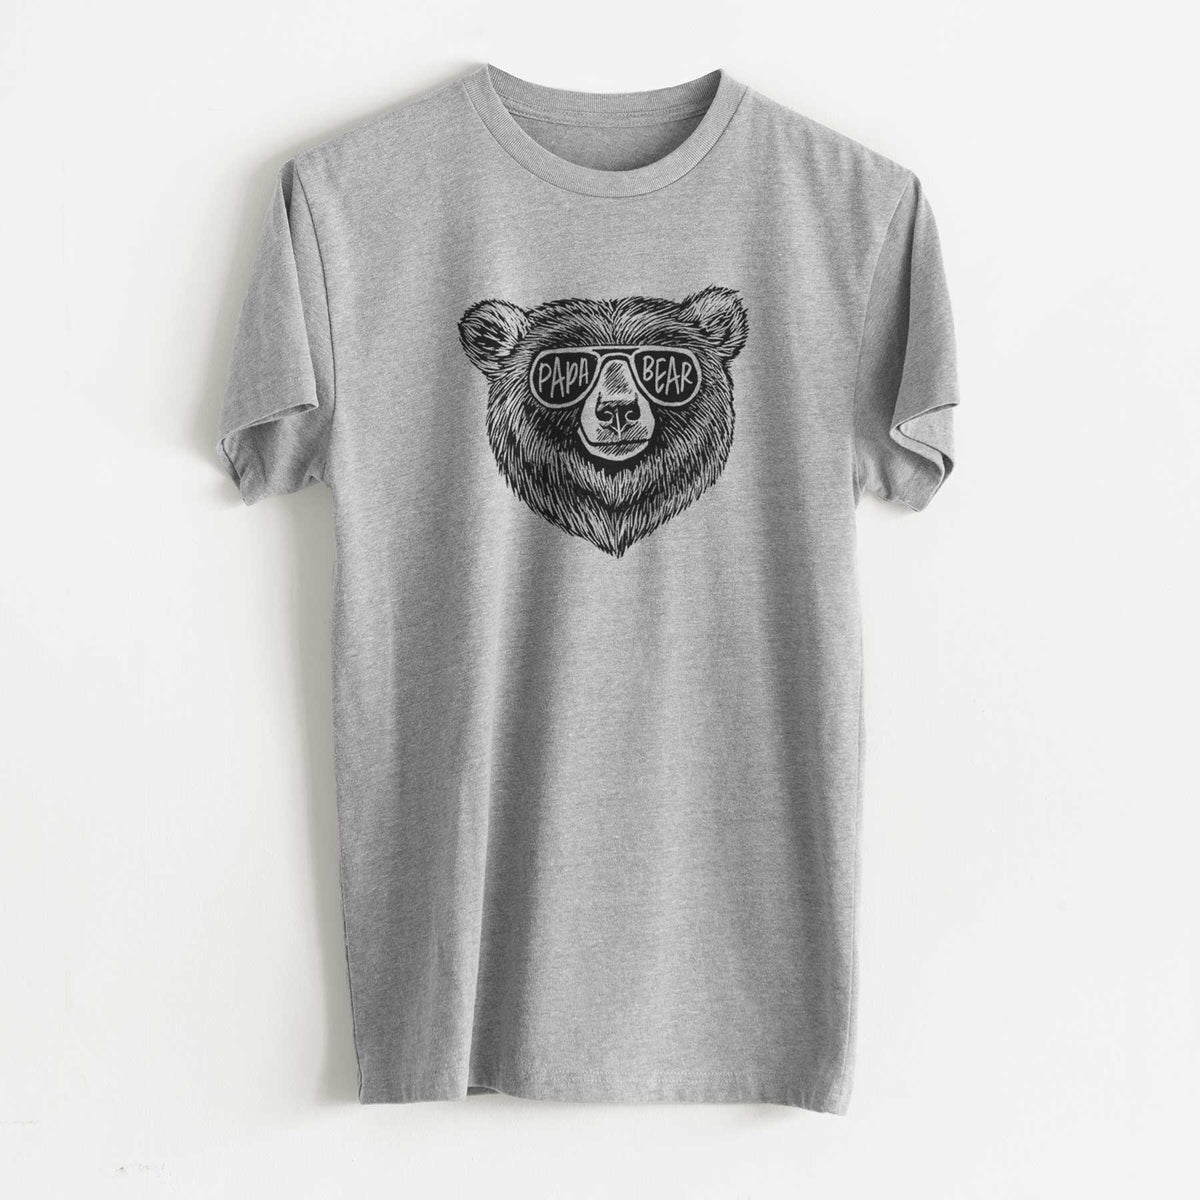 Papa Bear - Unisex Recycled Eco Tee  - CLOSEOUT - FINAL SALE